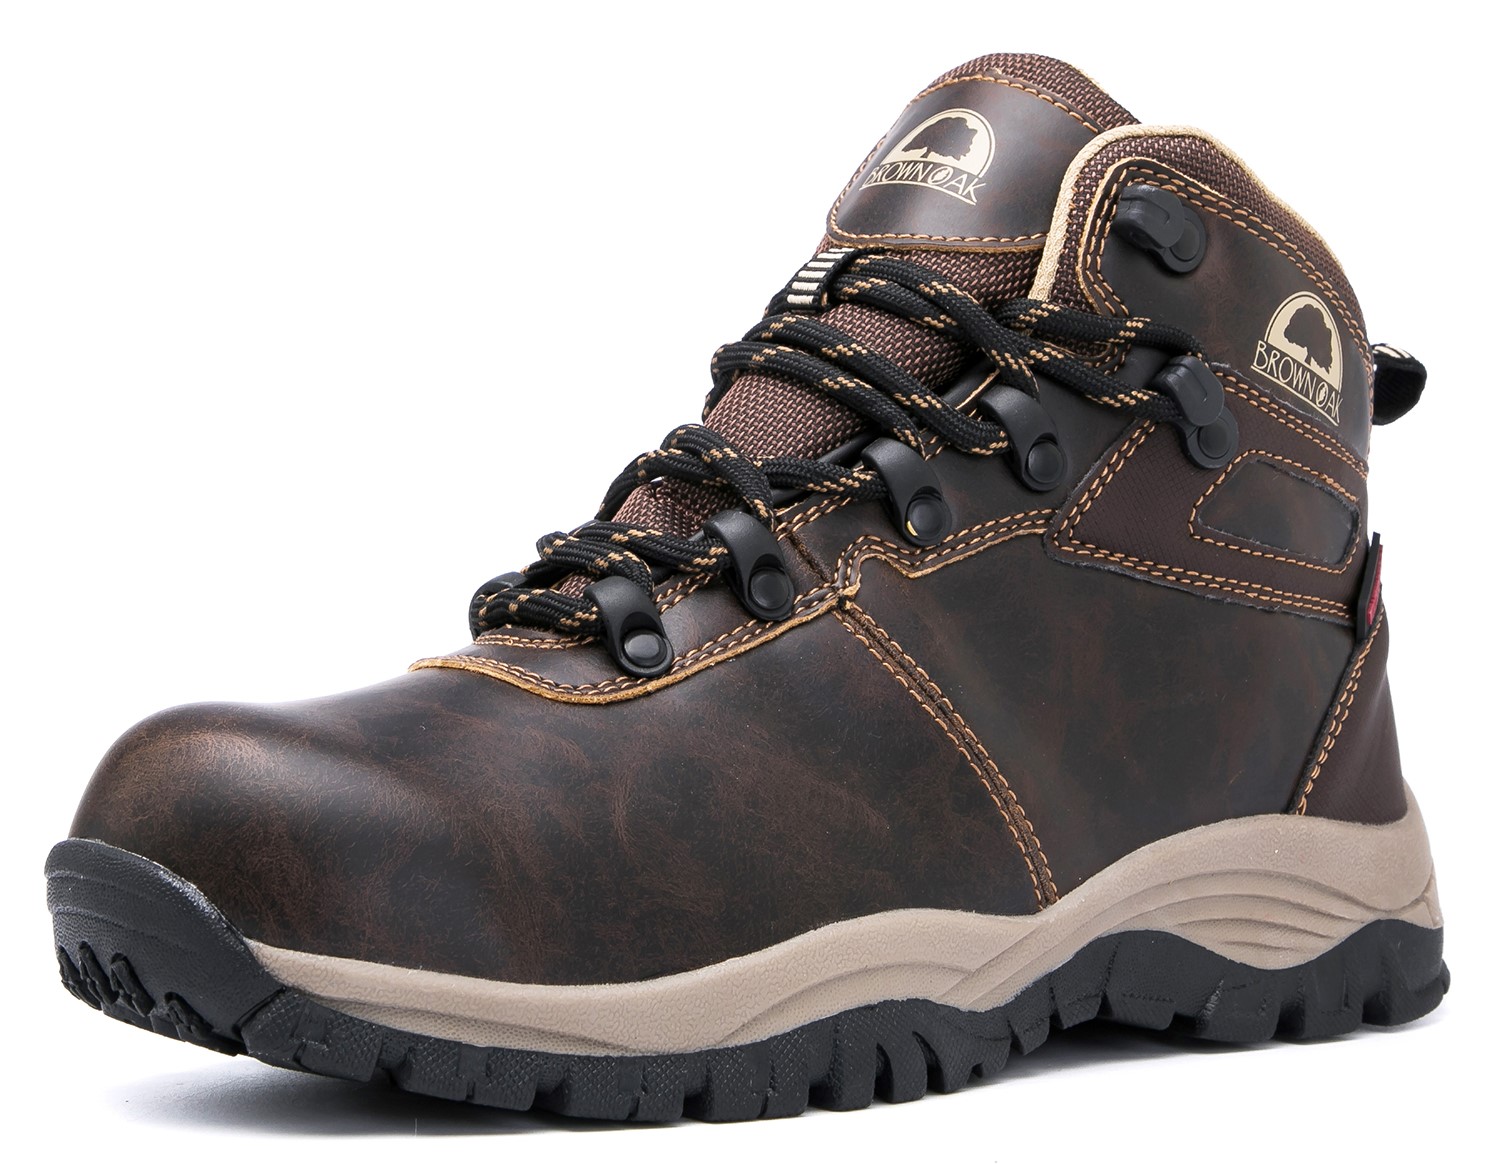 Brown Oak Womens Waterproof Trekking Camping Backpacking Outdoor Shoes Hiking Boots - image 1 of 7